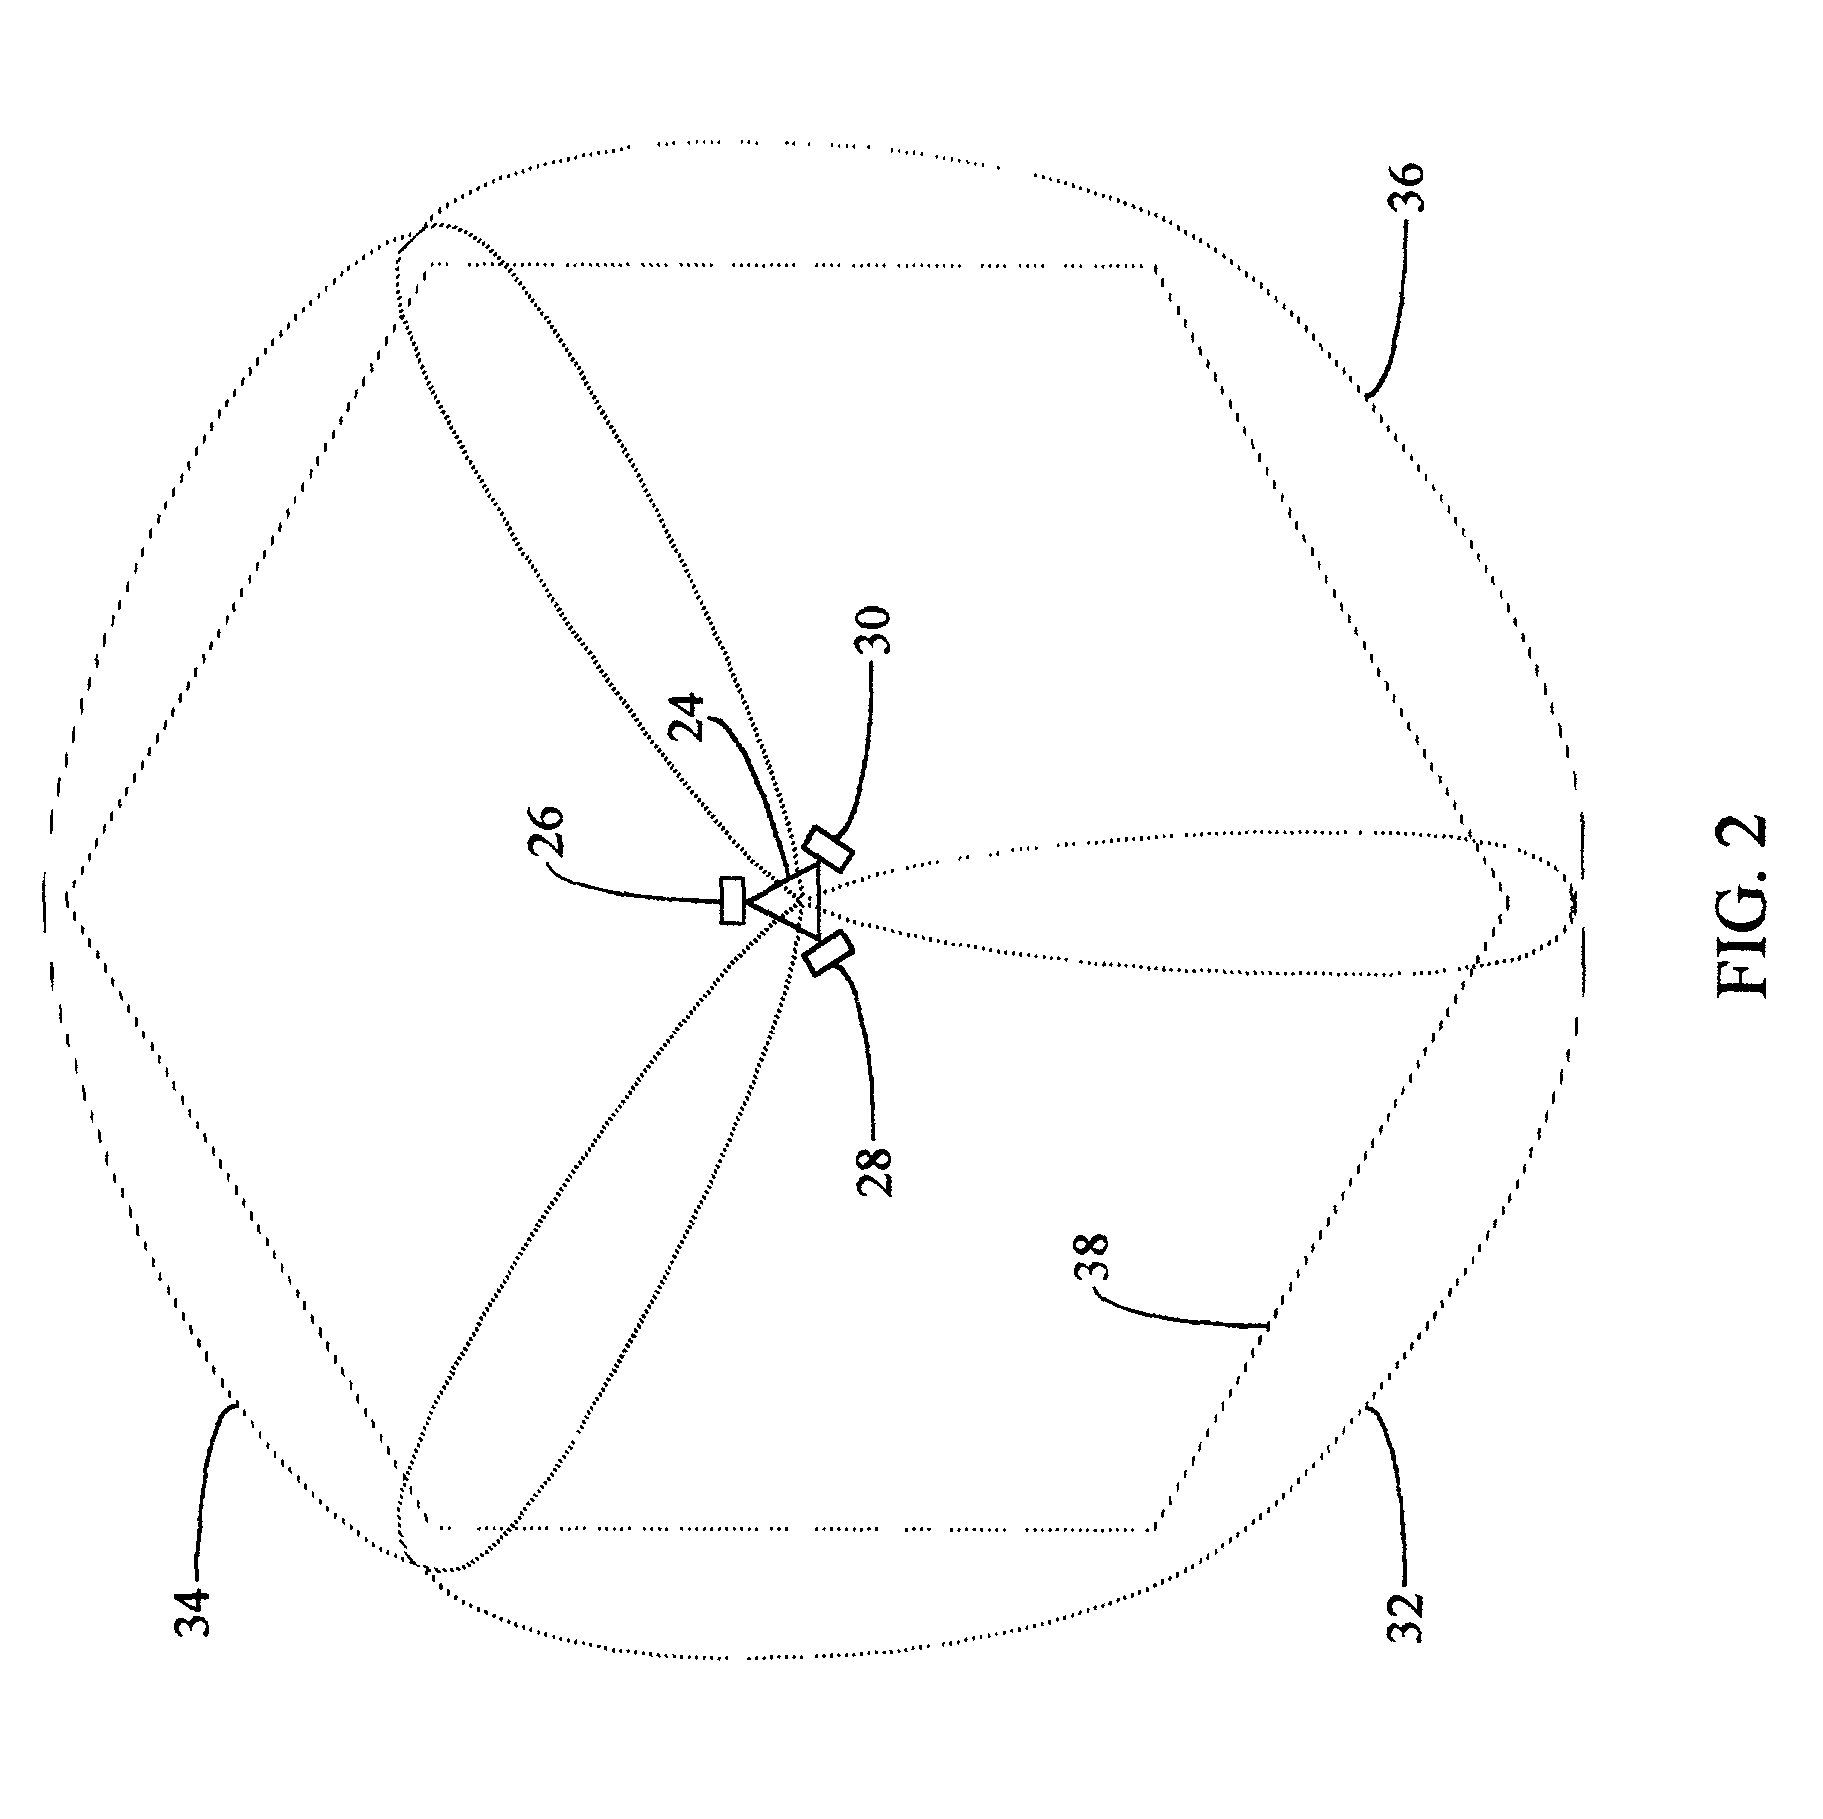 GPS satellite signal acquisition assistance system and method in a wireless communications network